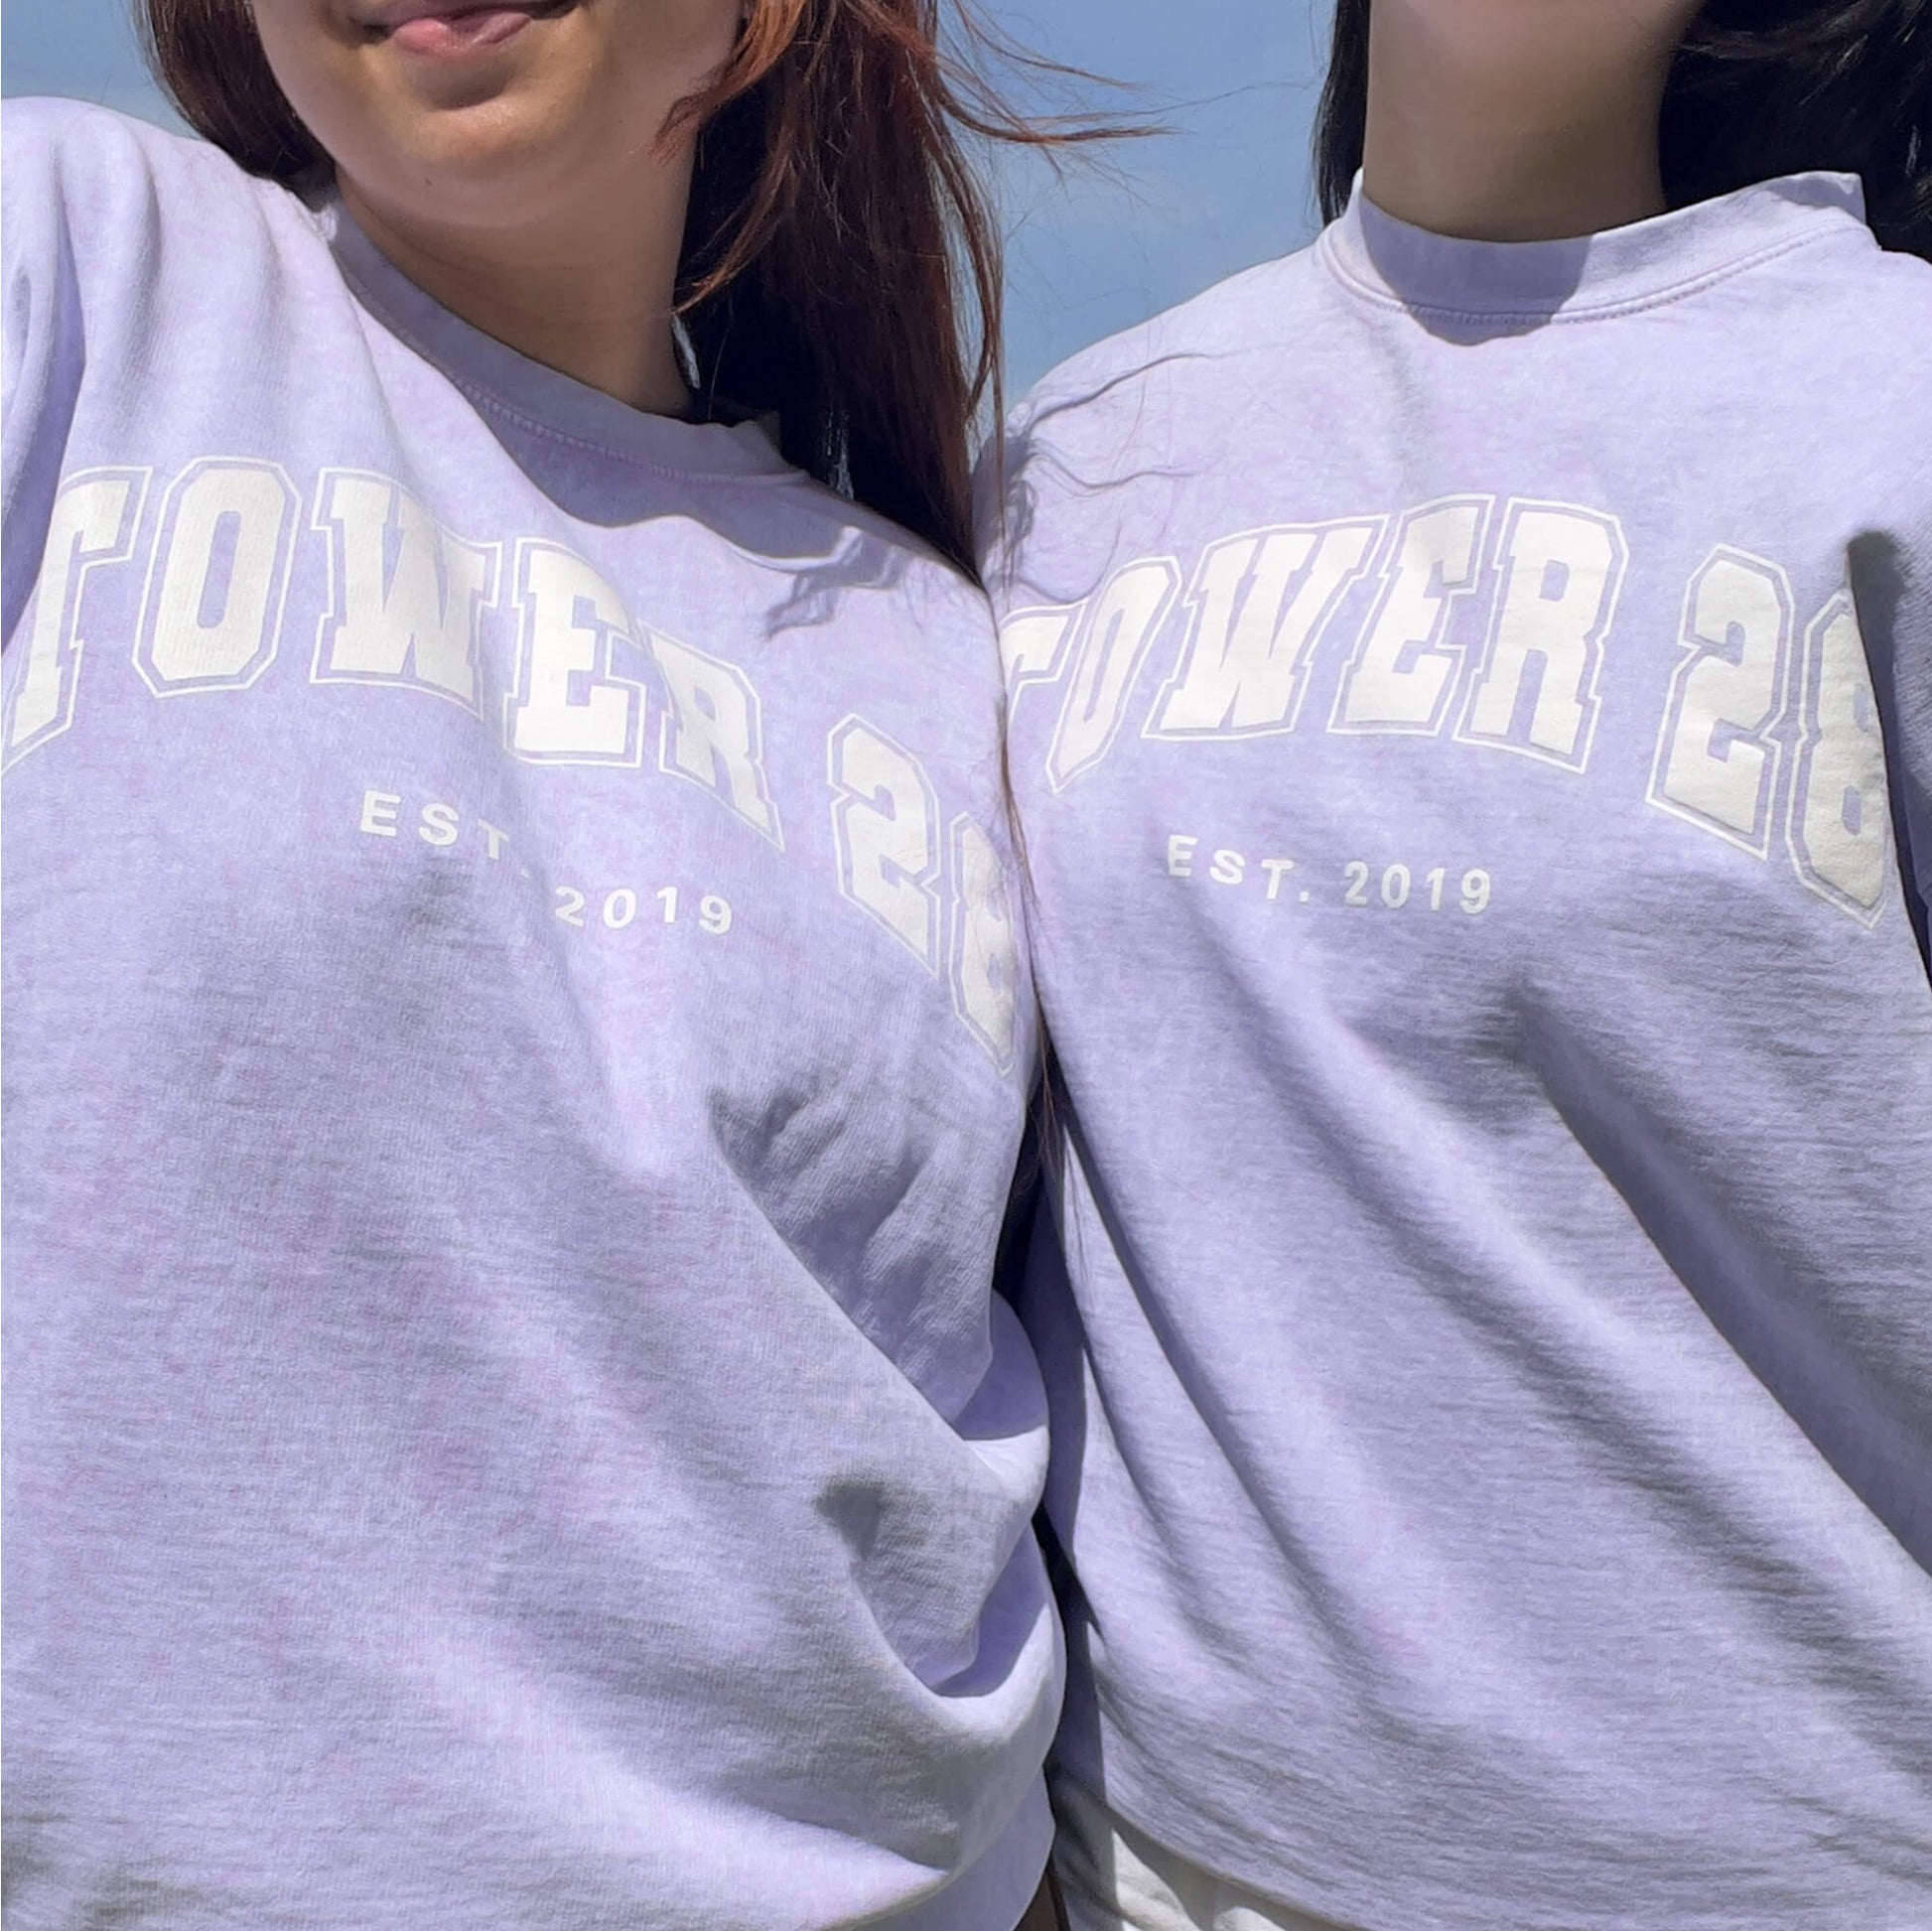 [Shared: Tower 28 Beauty Varsity Crewneck in vintage acid wash purple worn by two models